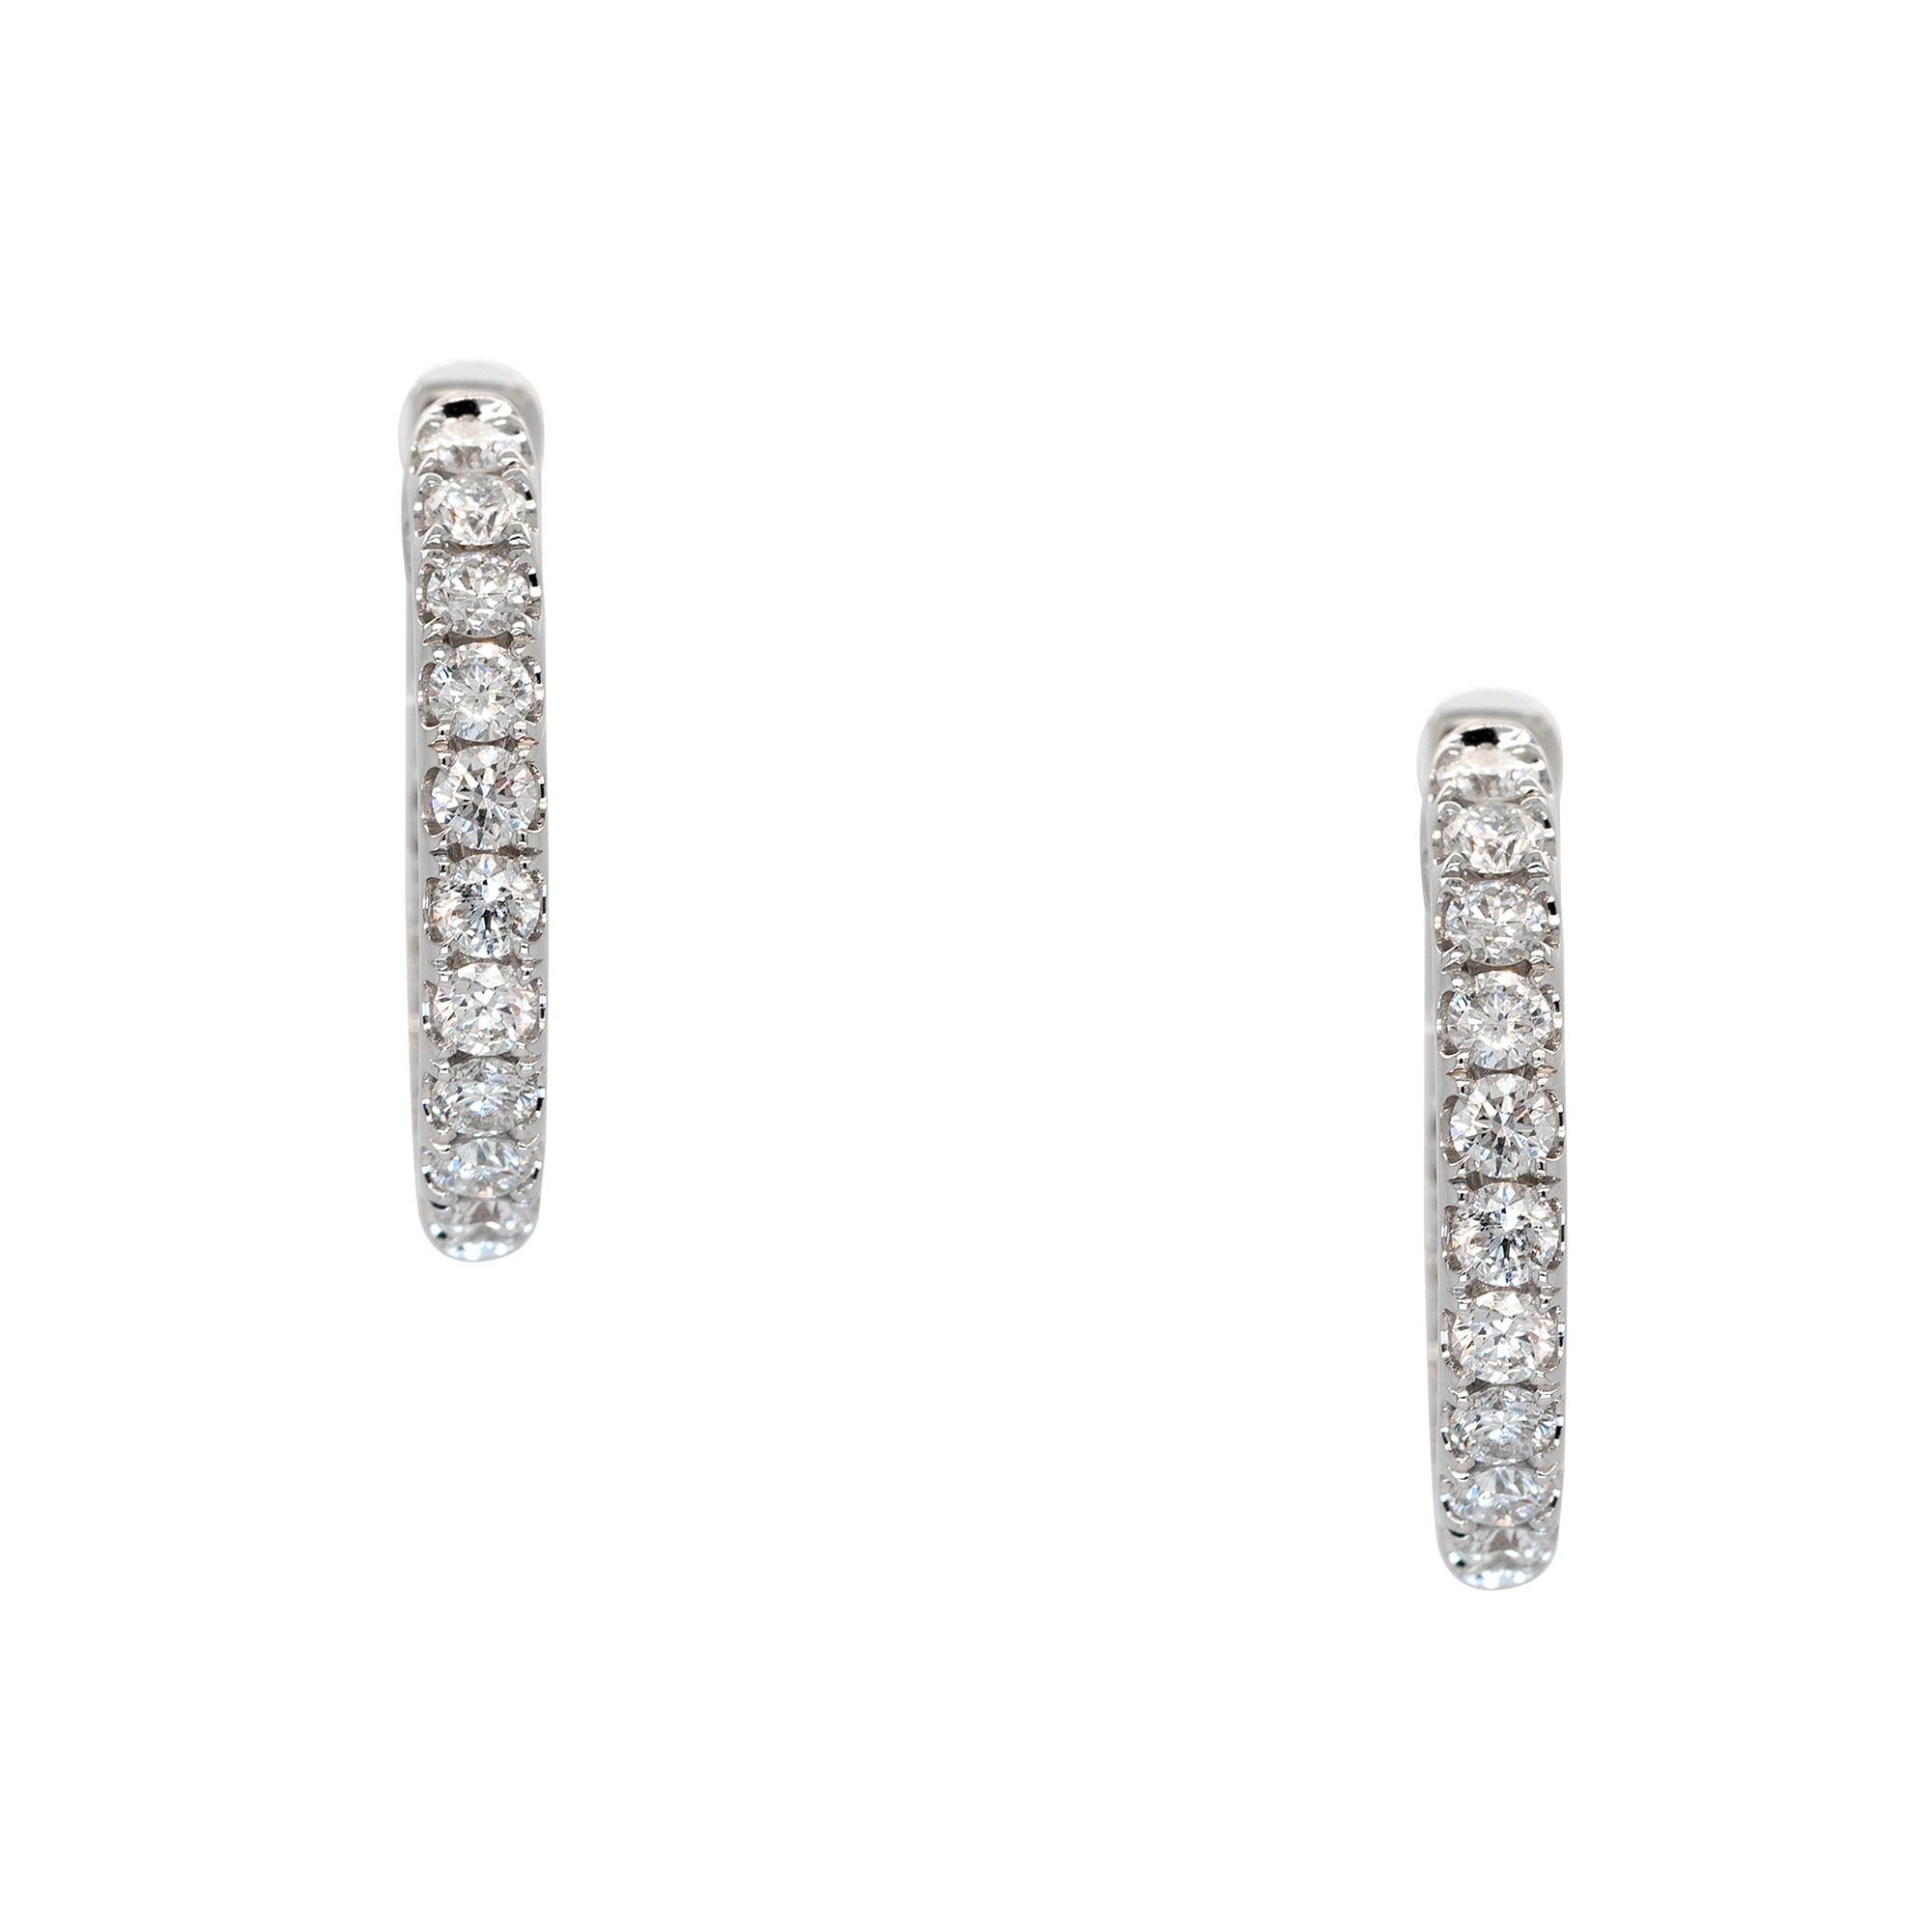 Material: 18k White Gold
Diamonds Details: 
0.99ct Round Brilliant Natural Diamond
G Color VS Clarity
Measurements: 55.88mm x 2.5mm x 2.2mm
Closure: Post Snaps
Total Weight: 5.5g (3.6dwt)
This item comes with a presentation box!
SKU: A30317328

A